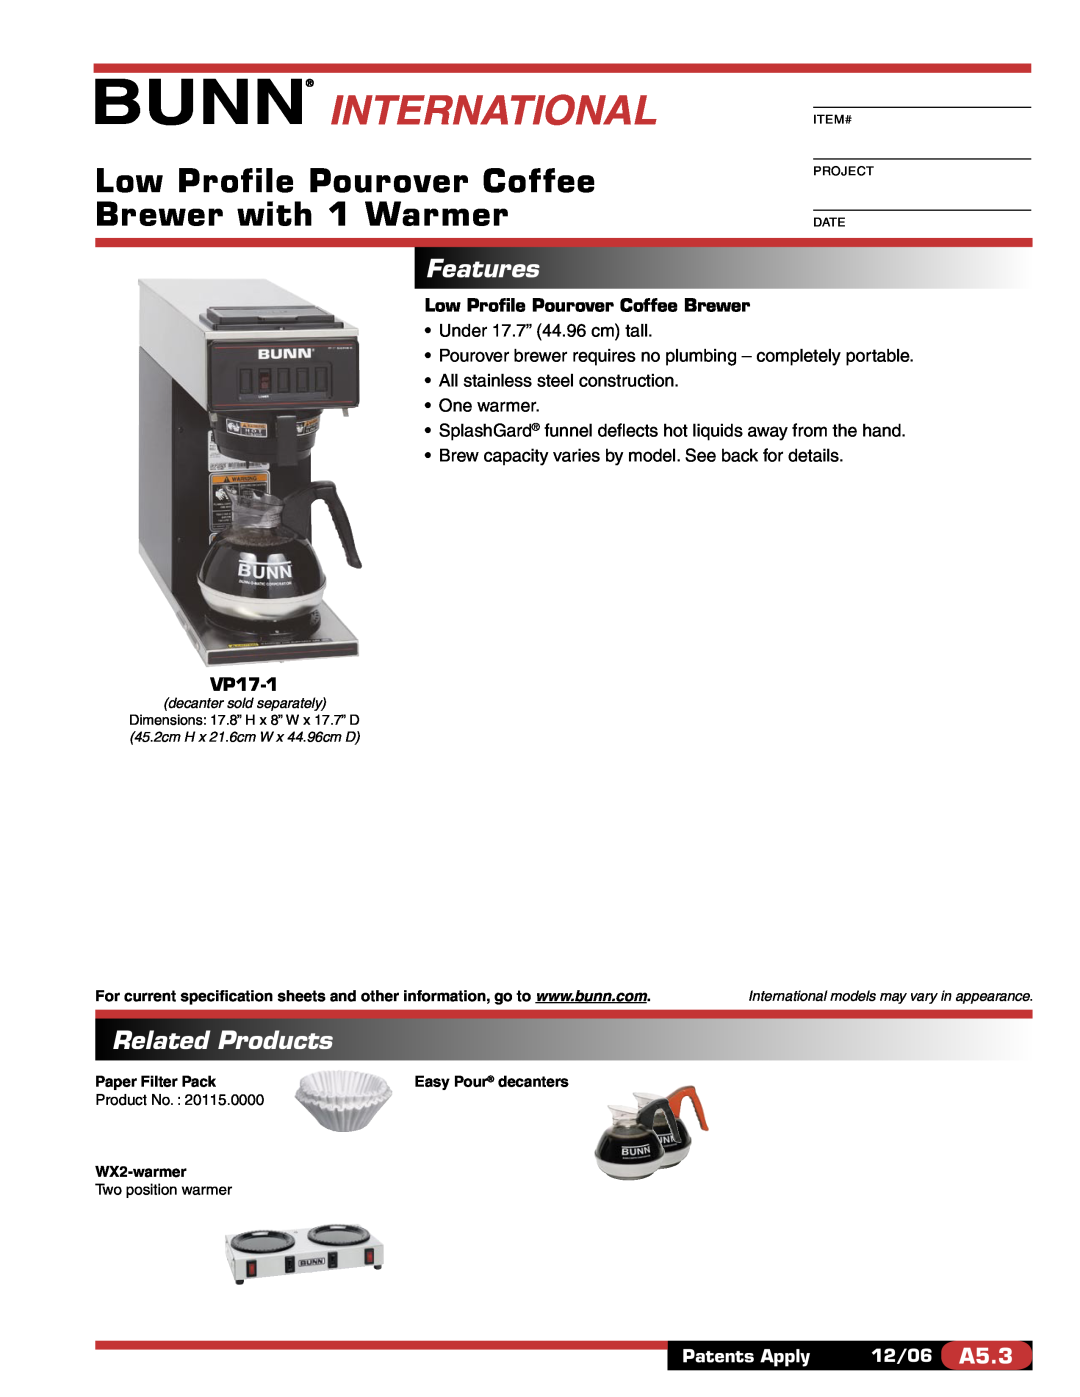 Bunn VP17-1 specifications International Item#, Low Profile Pourover Coffee Brewer with 1 Warmer, Features, Patents Apply 